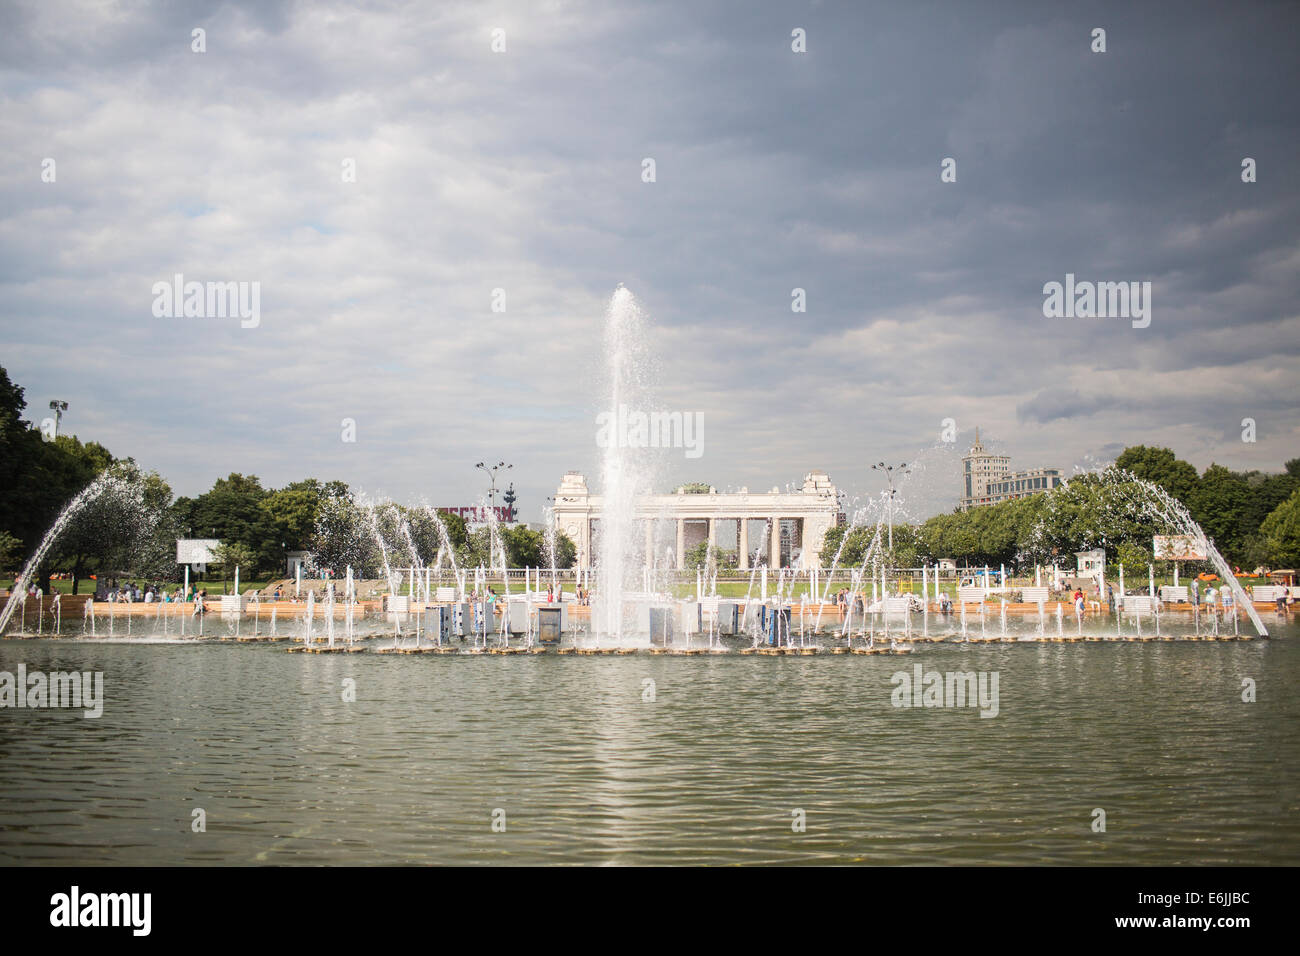 Fountain in water at Gorky Park, Moscow, Russia Stock Photo